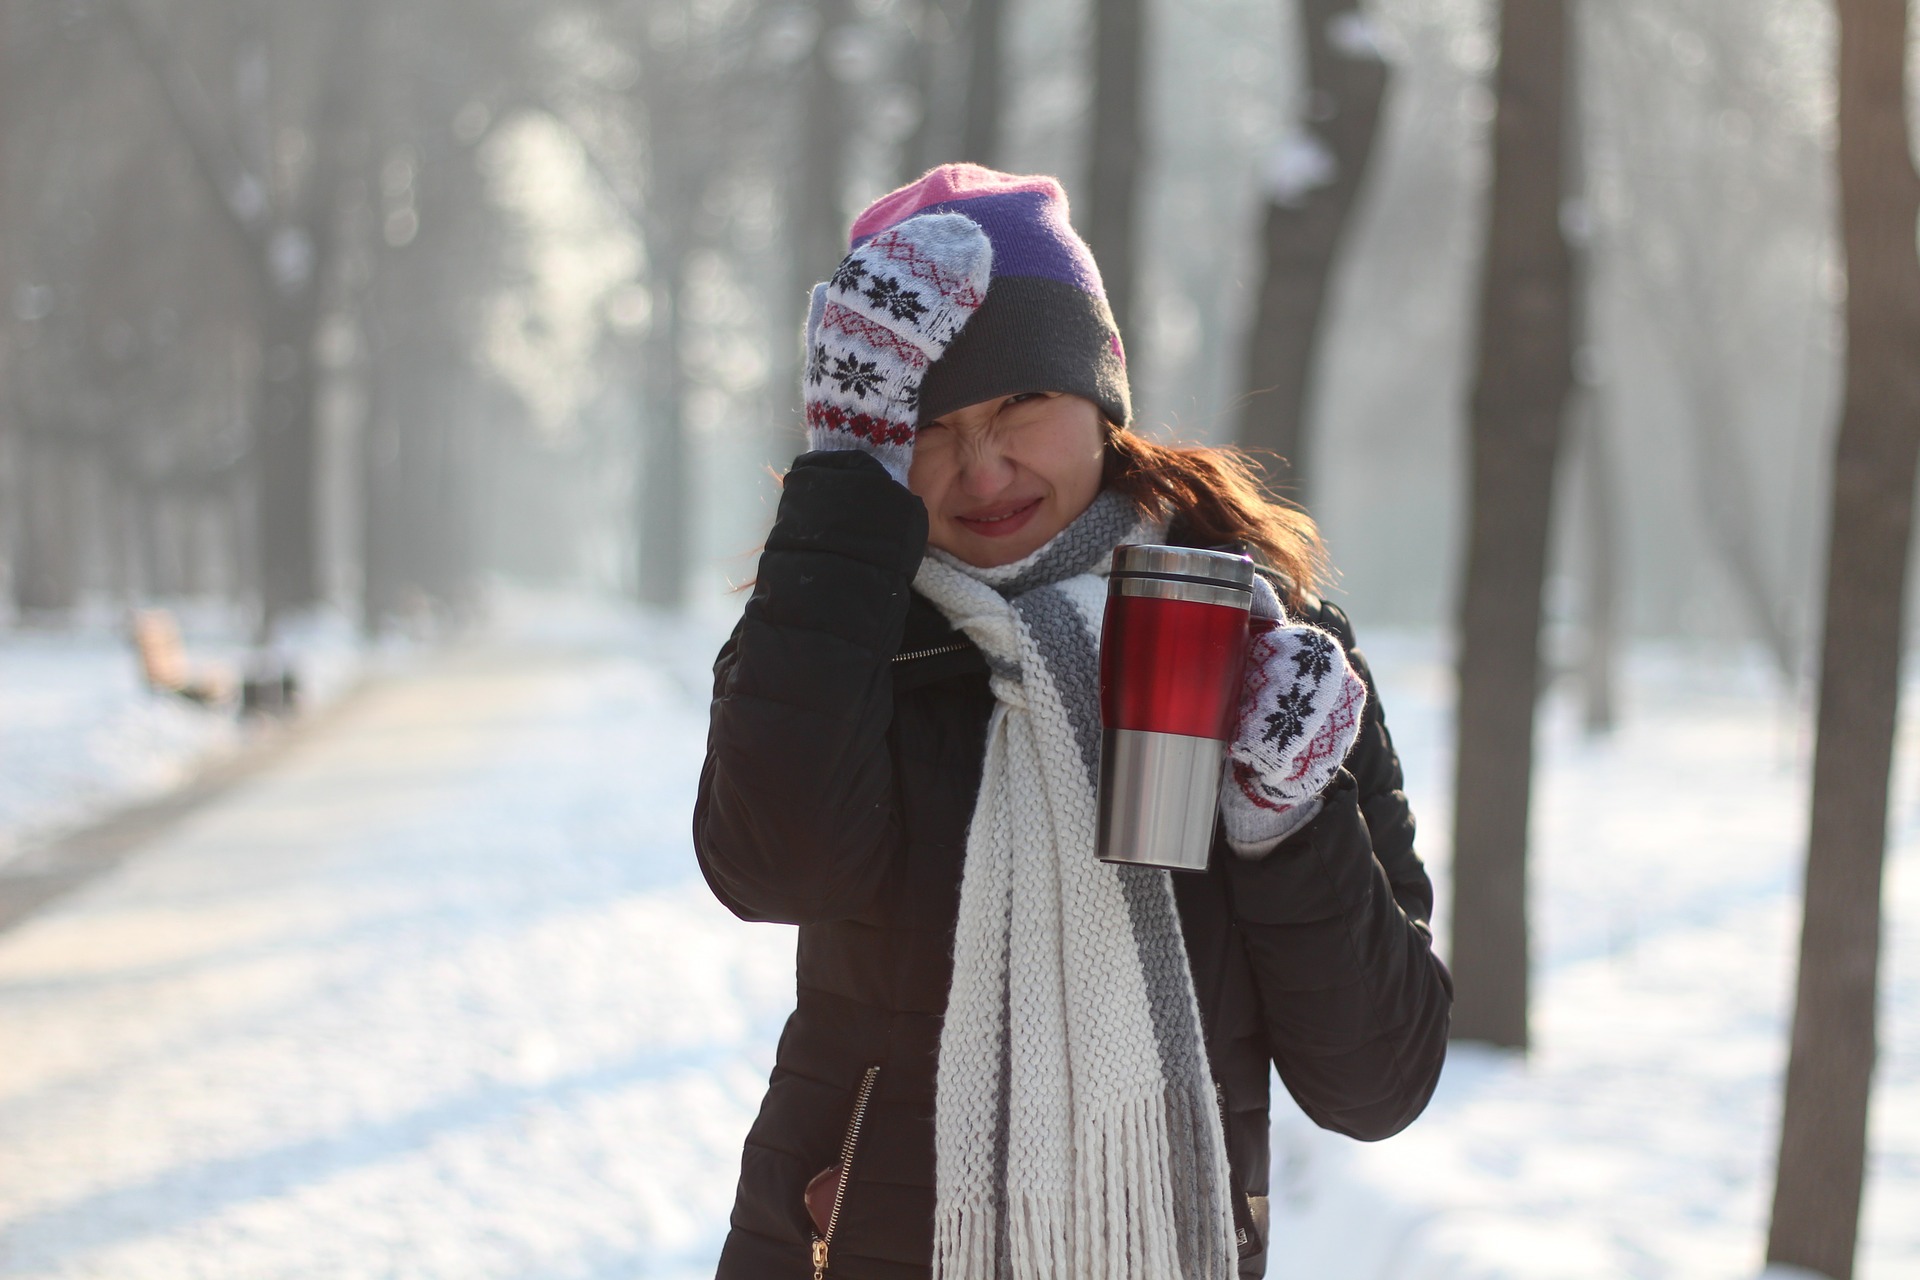 The 8 Emotional Stages Of Being Caught in a Blizzard